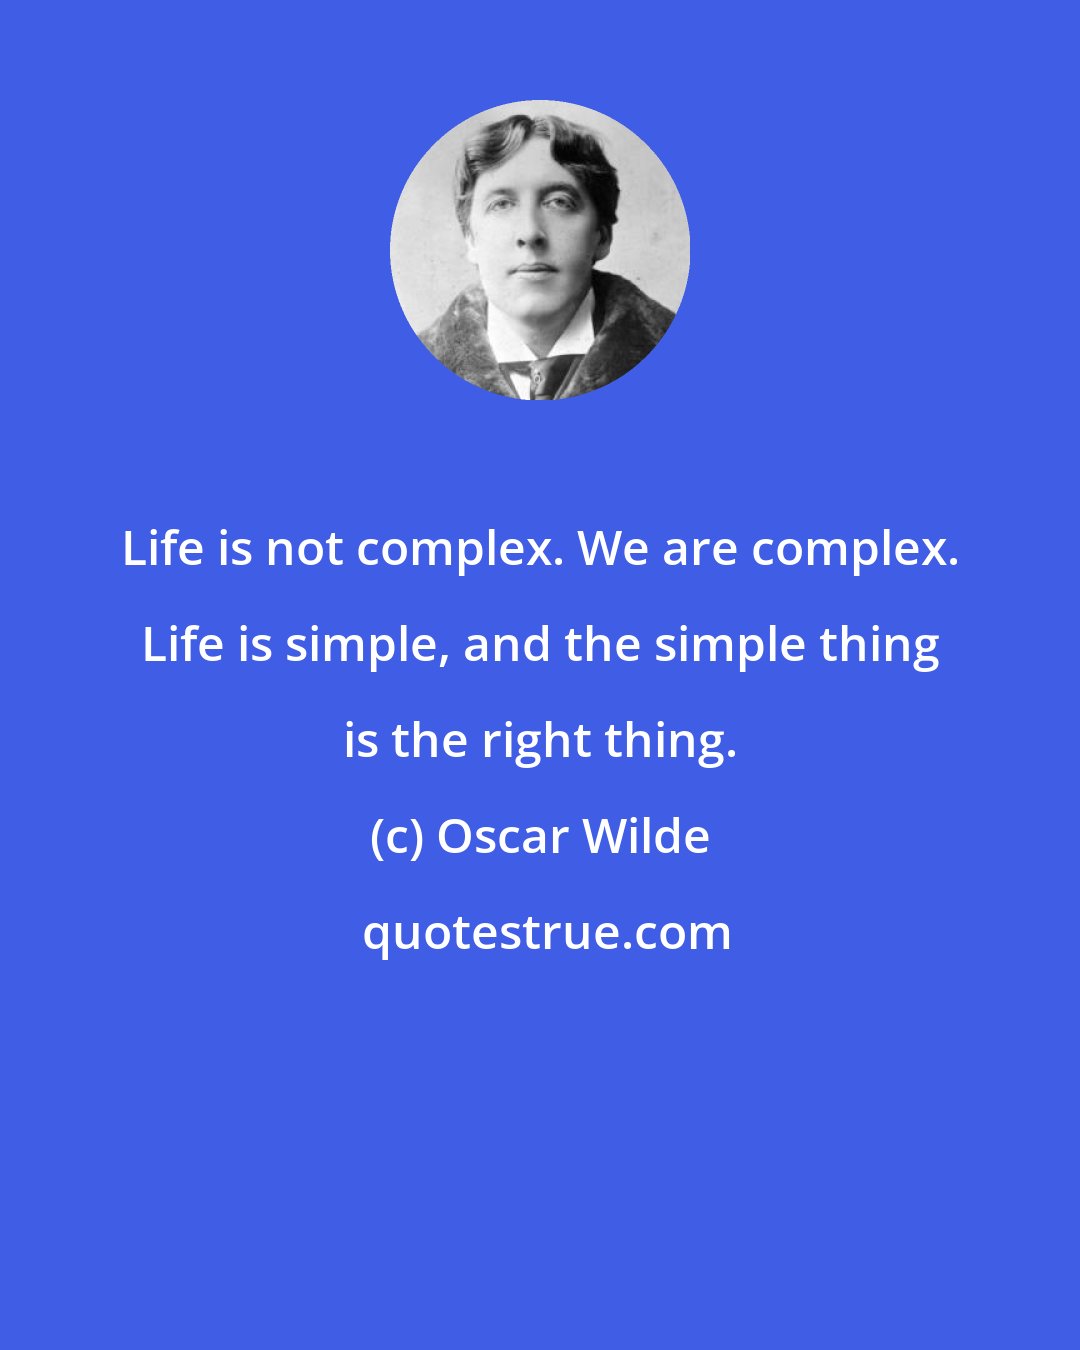 Oscar Wilde: Life is not complex. We are complex. Life is simple, and the simple thing is the right thing.